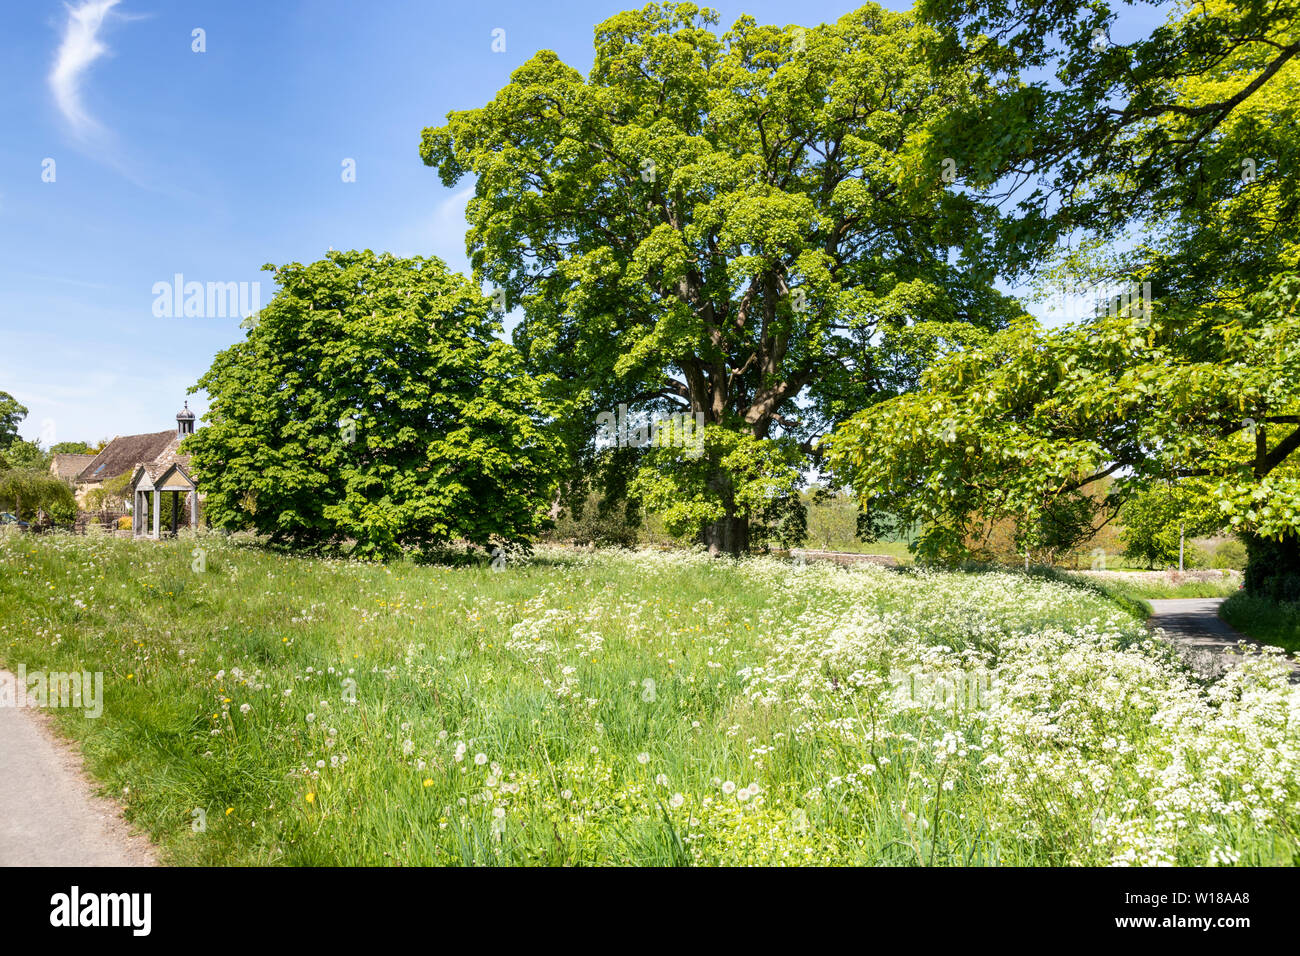 Maytime in the Cotswolds - The village green in the Cotswold village of Farmington, Gloucestershire UK with its old sycamore tree and 1874 pumphouse Stock Photo